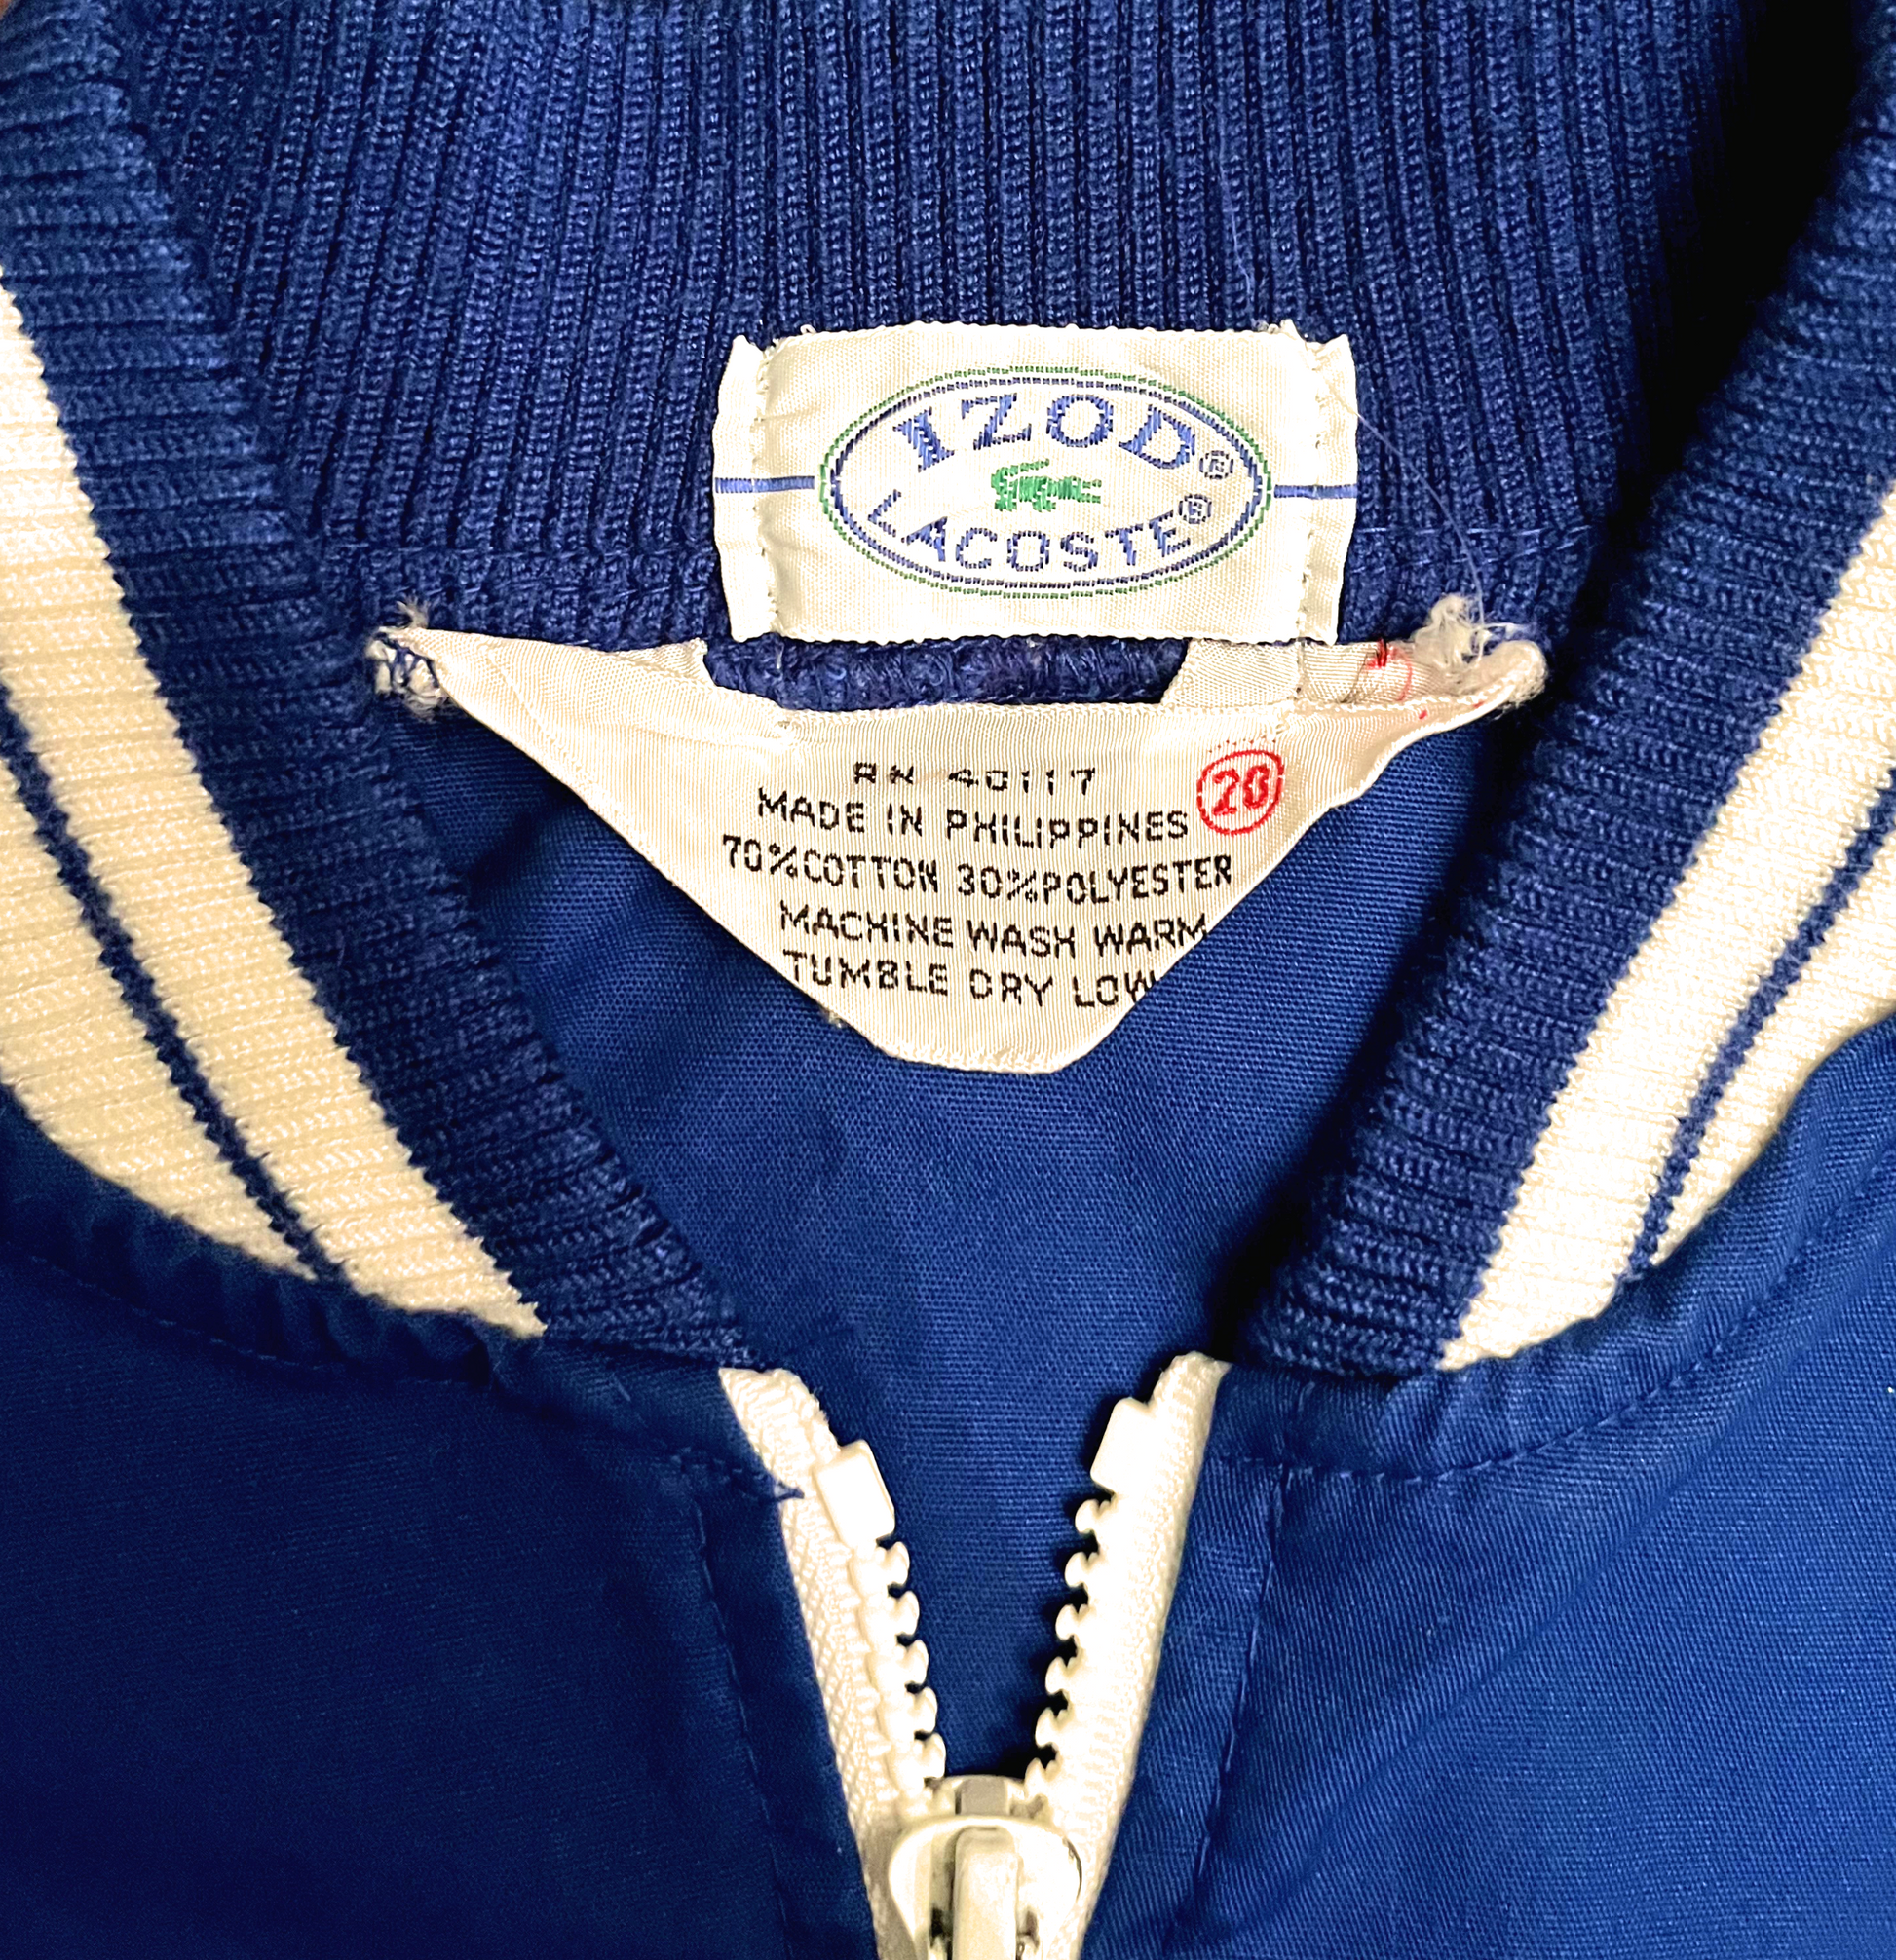 Tag of blue Lacoste jacket photographed laying down.